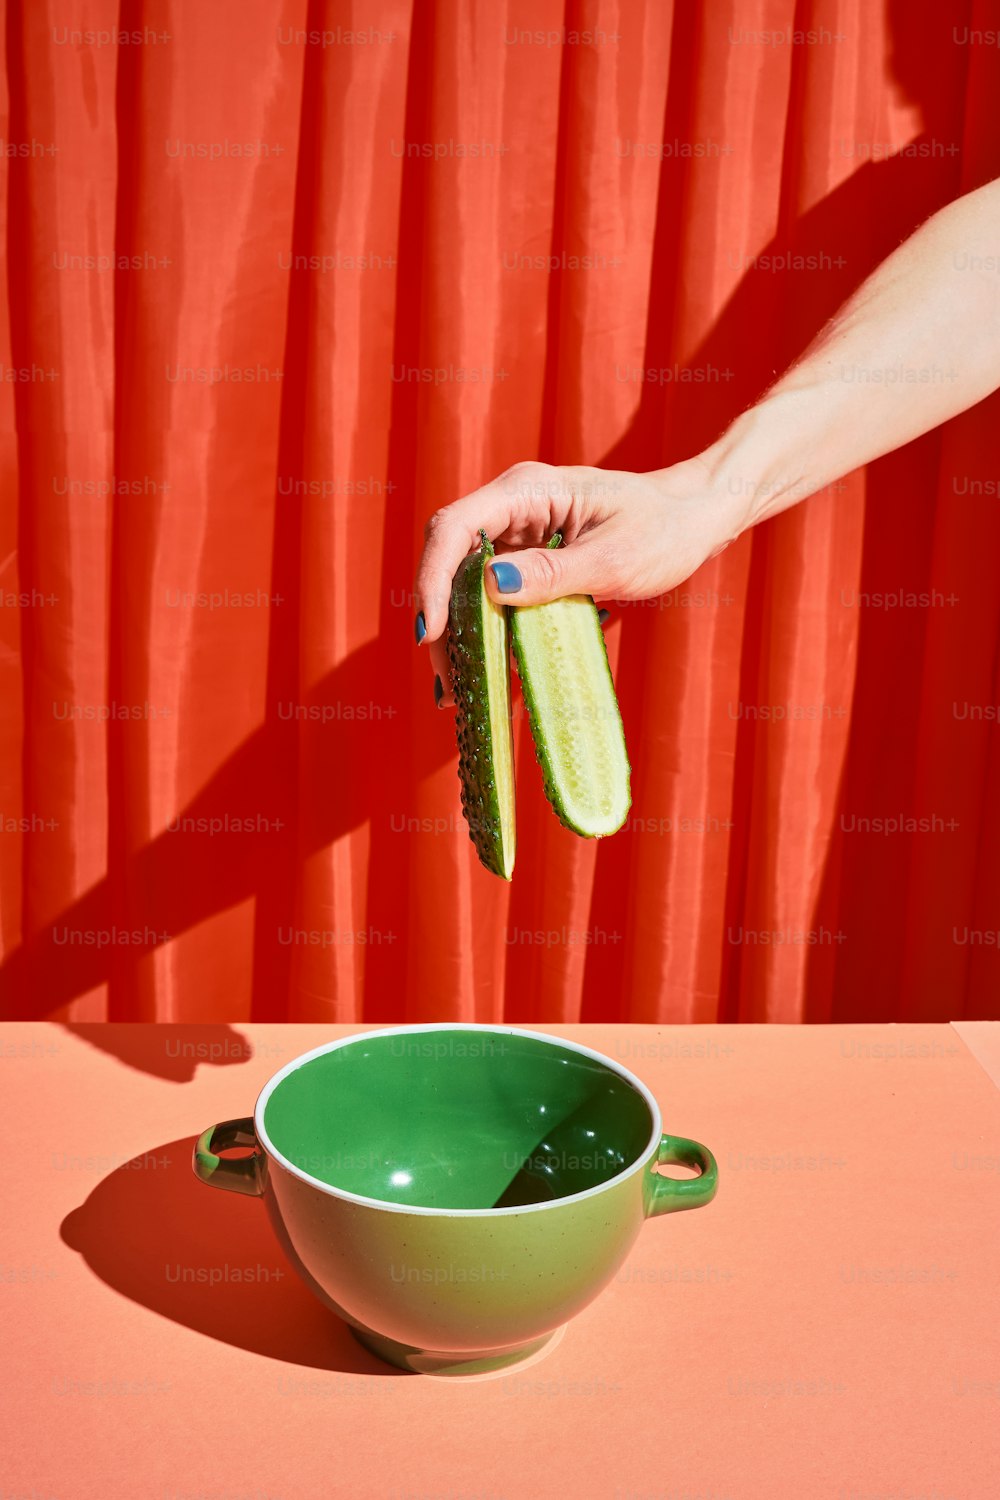 a woman's hand is cleaning a bowl with a green cloth